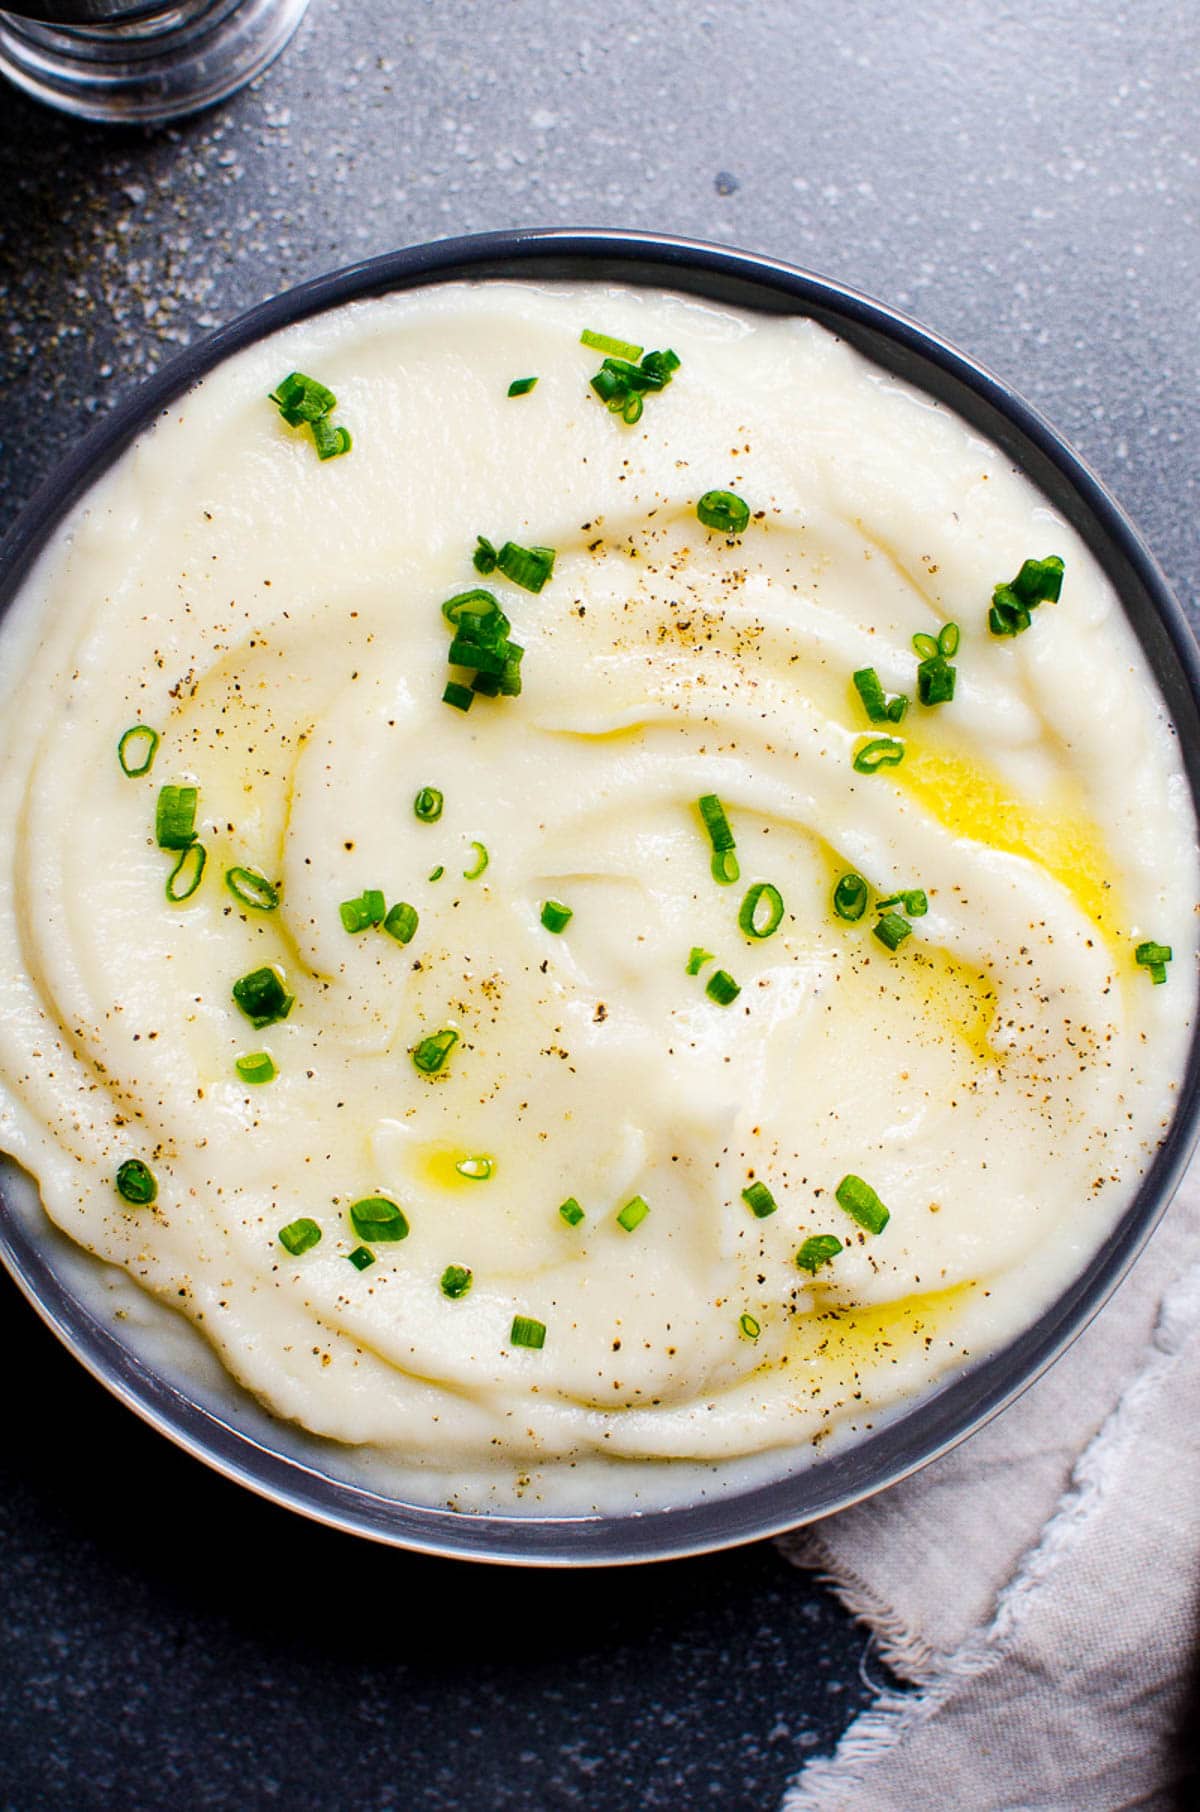 Mashed cauliflower served in a bowl garnished with melted butter, chives and pepper.